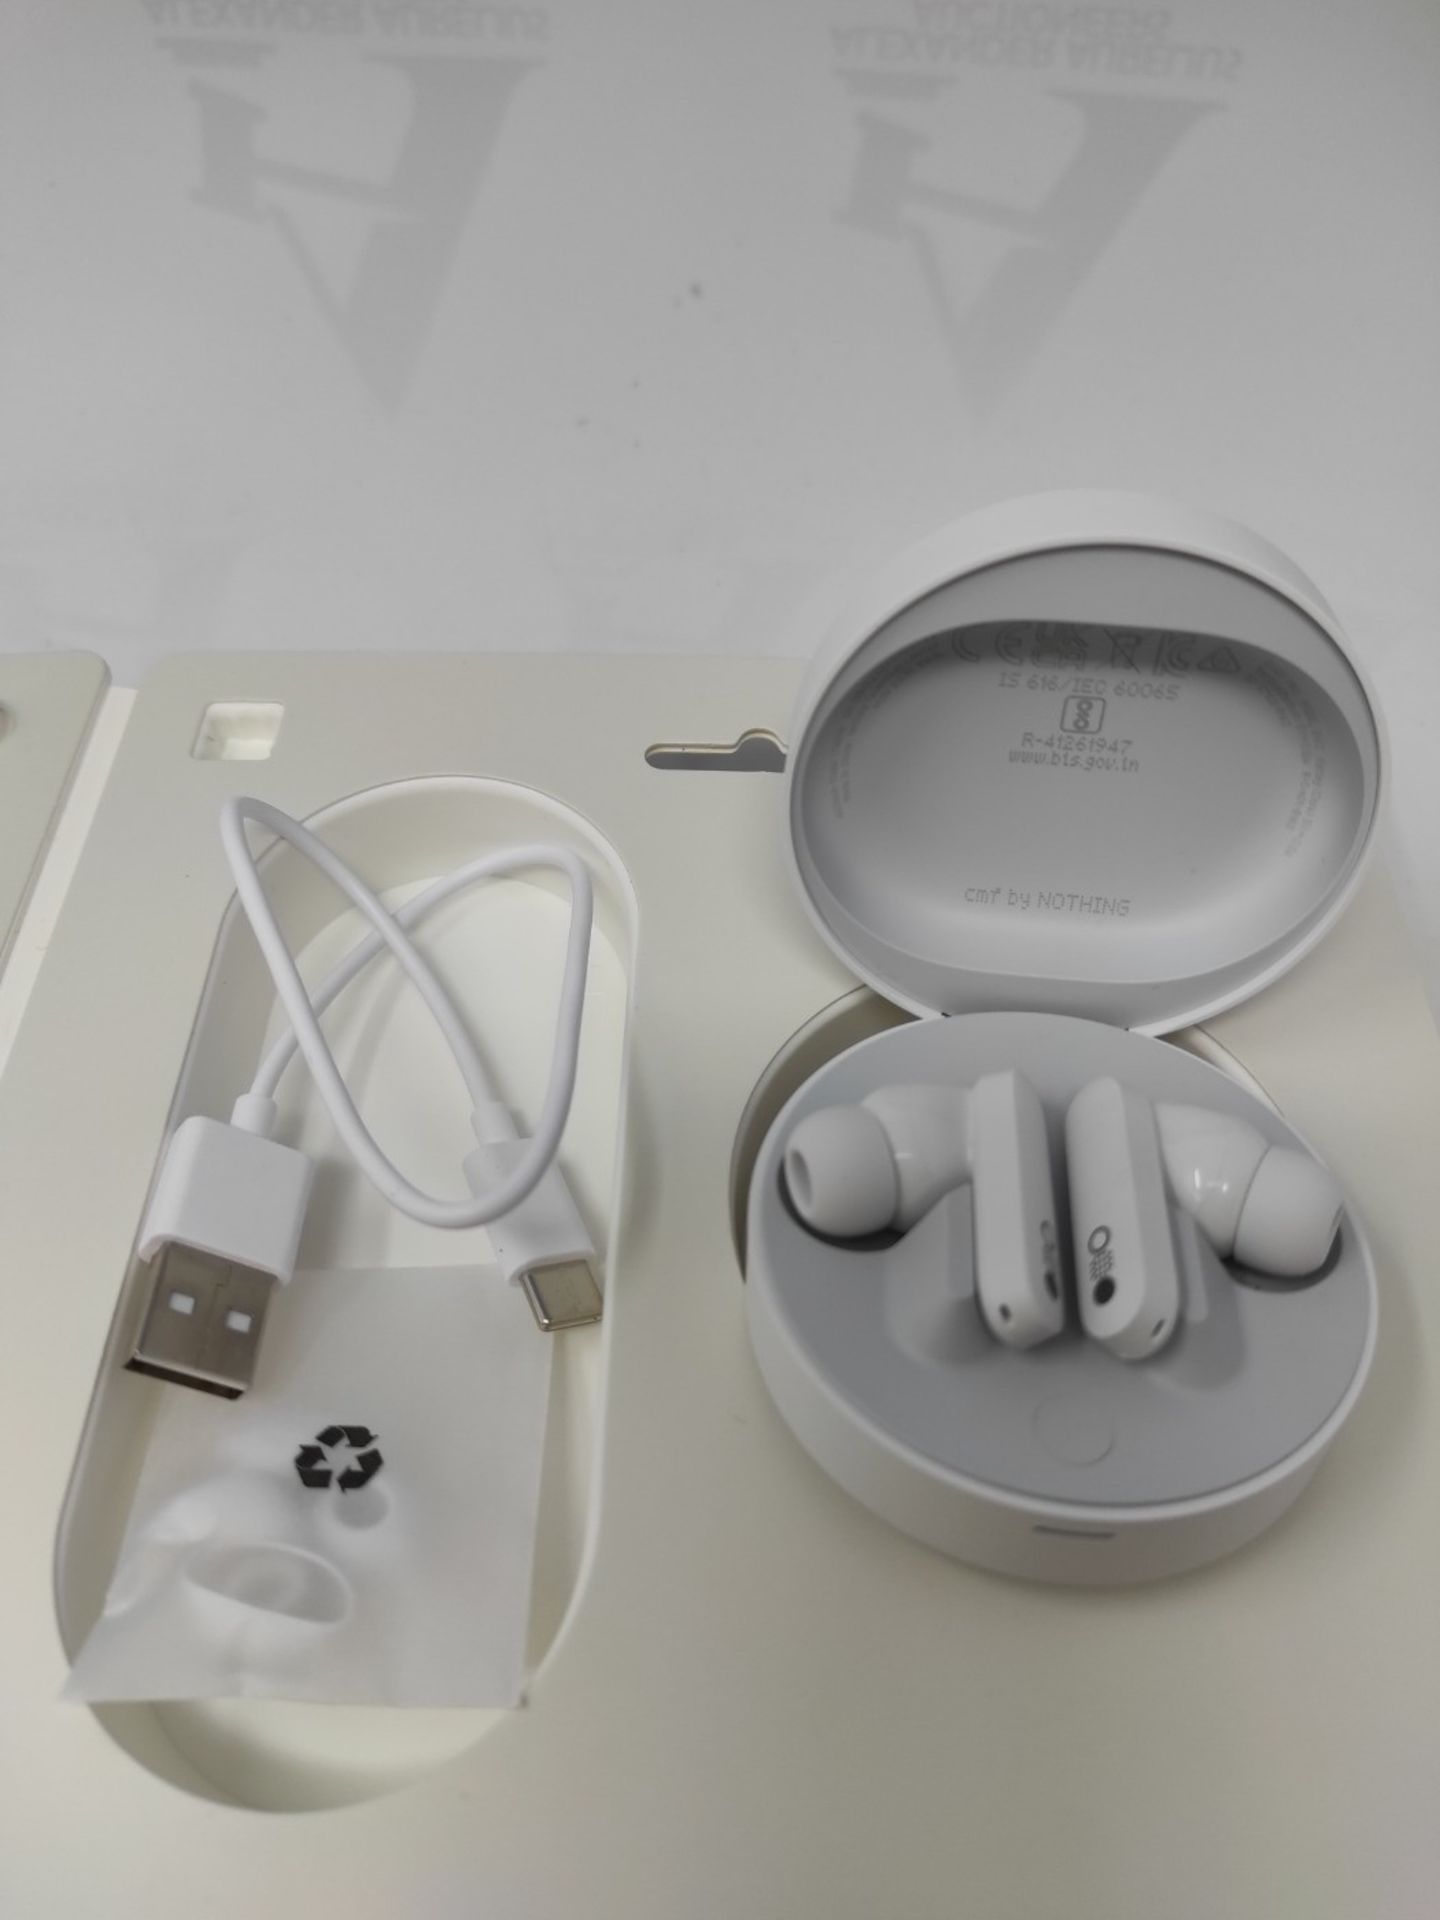 CMF by Nothing Buds Pro Wirelesss Earphones with 45 dB ANC, Ultra Bass Technology, Cus - Bild 3 aus 3